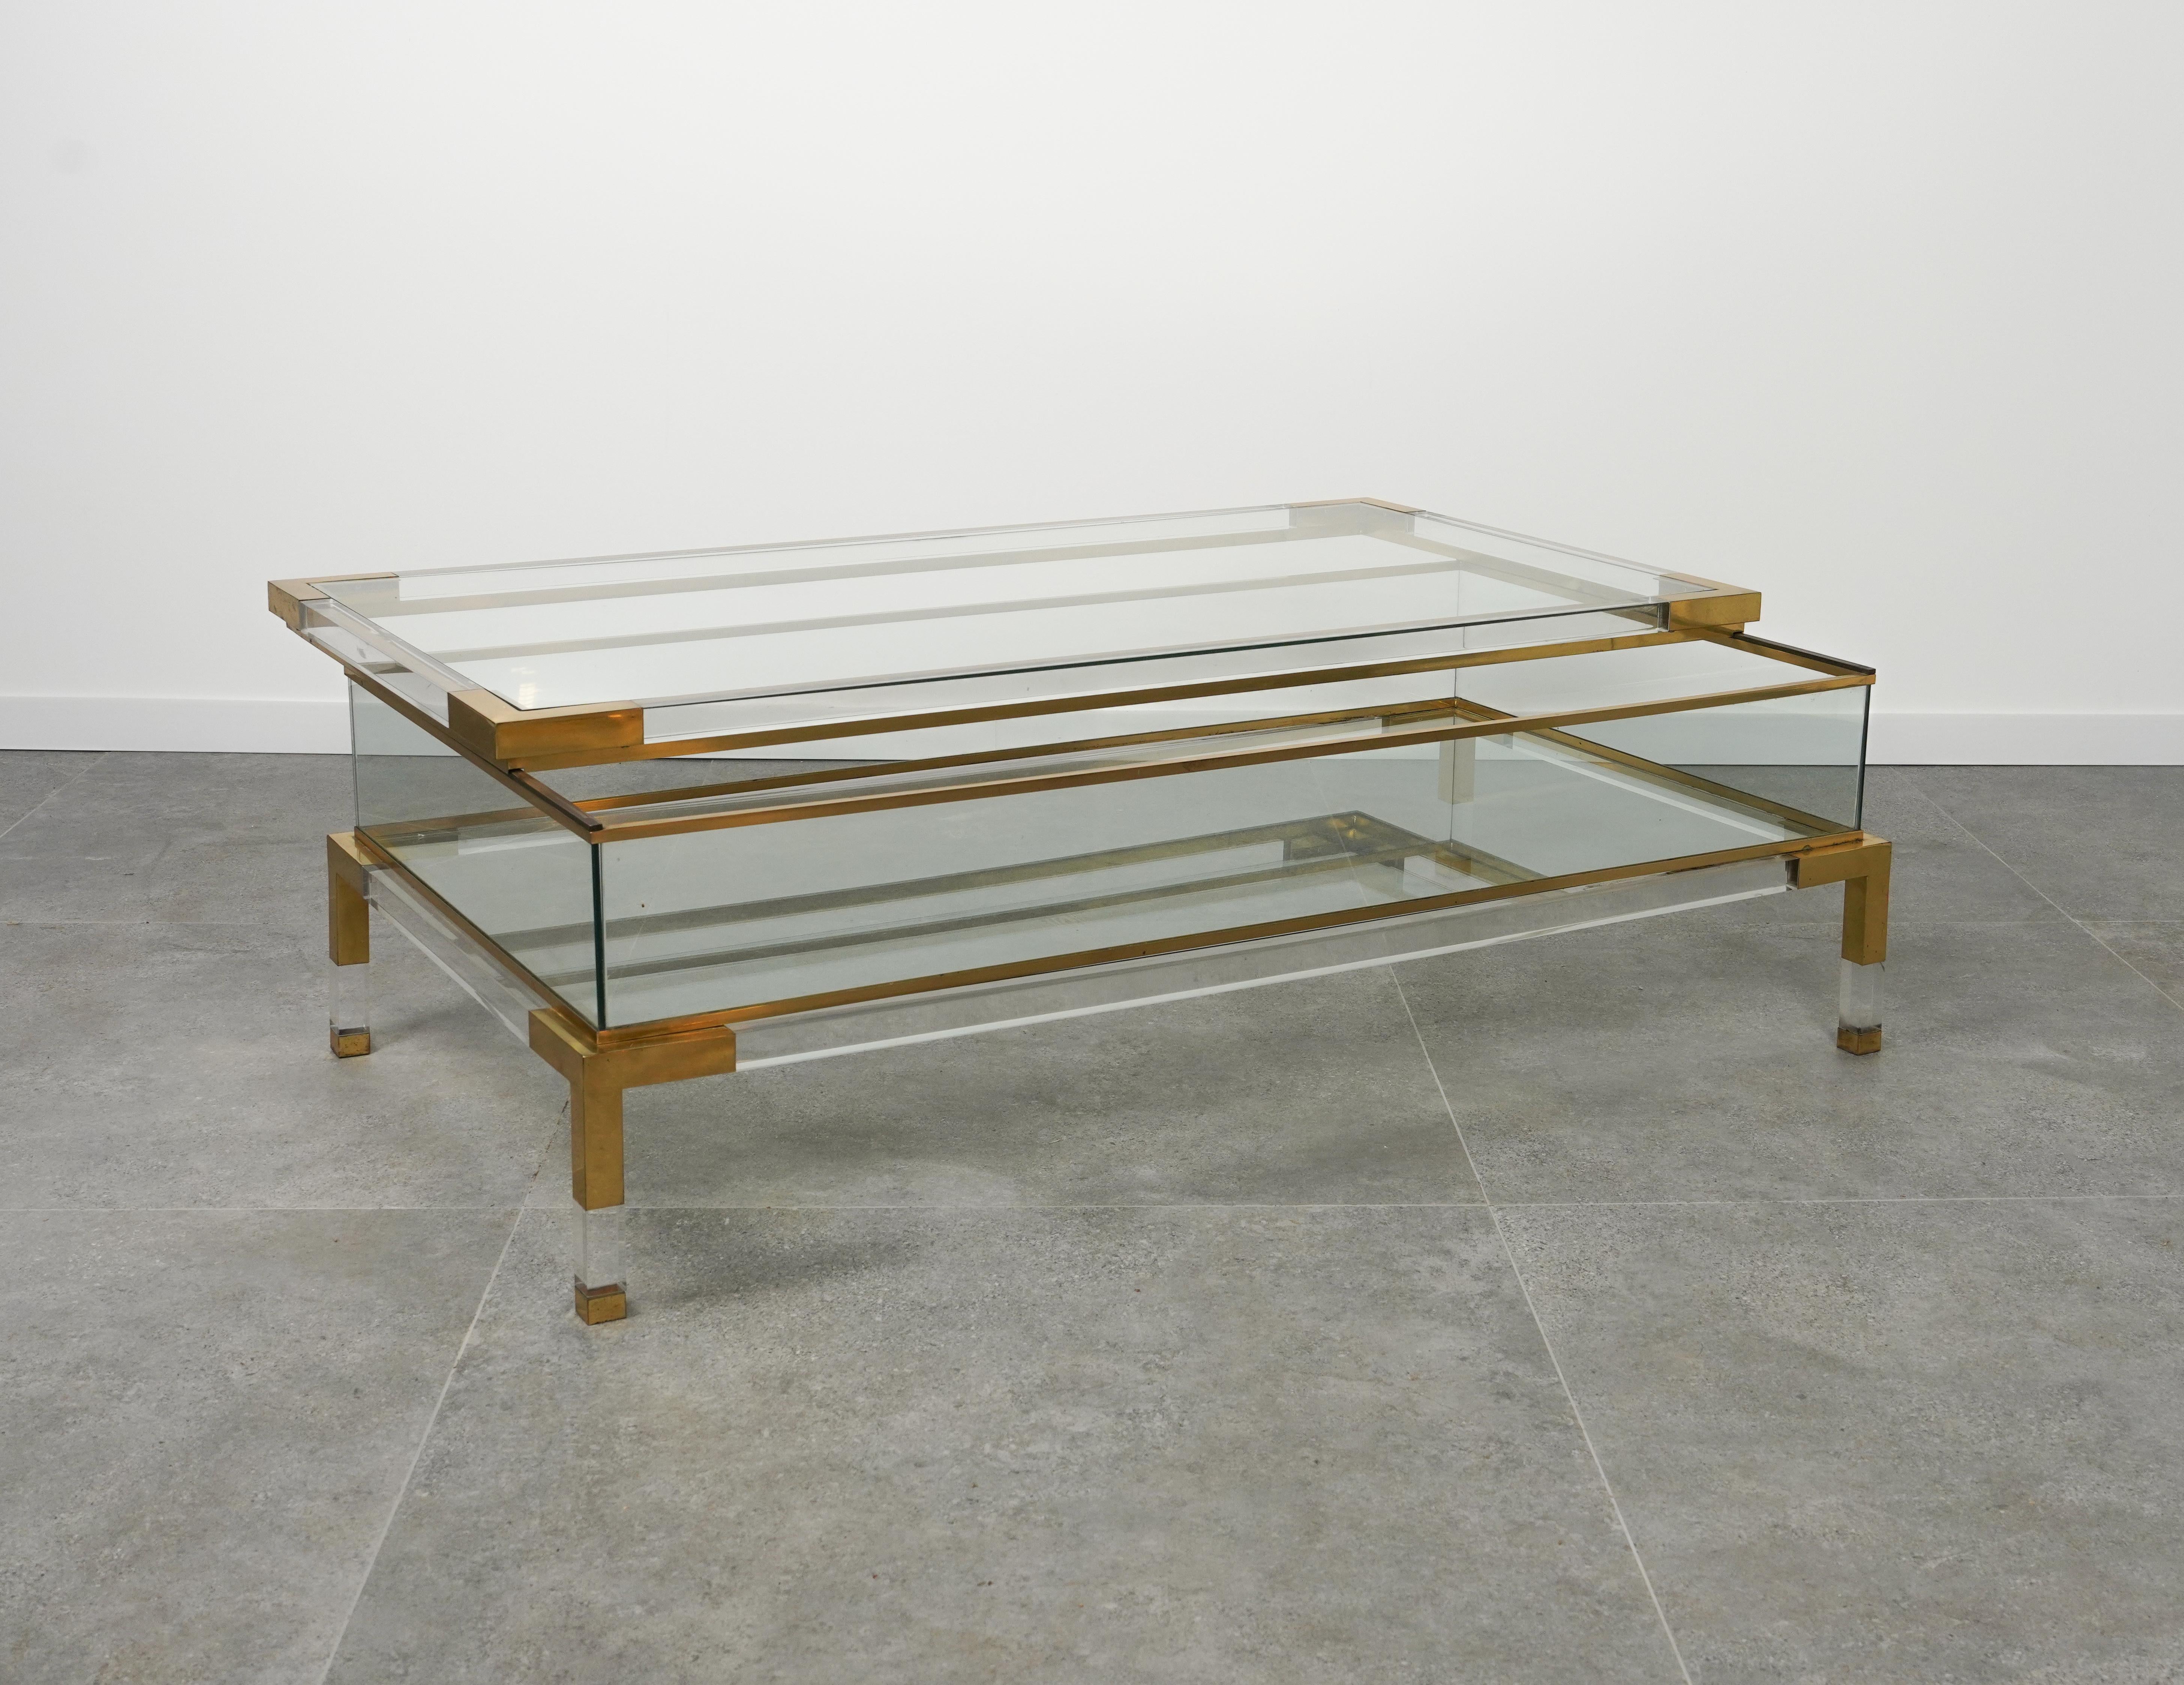 Metal Midcentury Coffee Table in Lucite, Brass & Glass by Maison Jansen, France 1970s For Sale